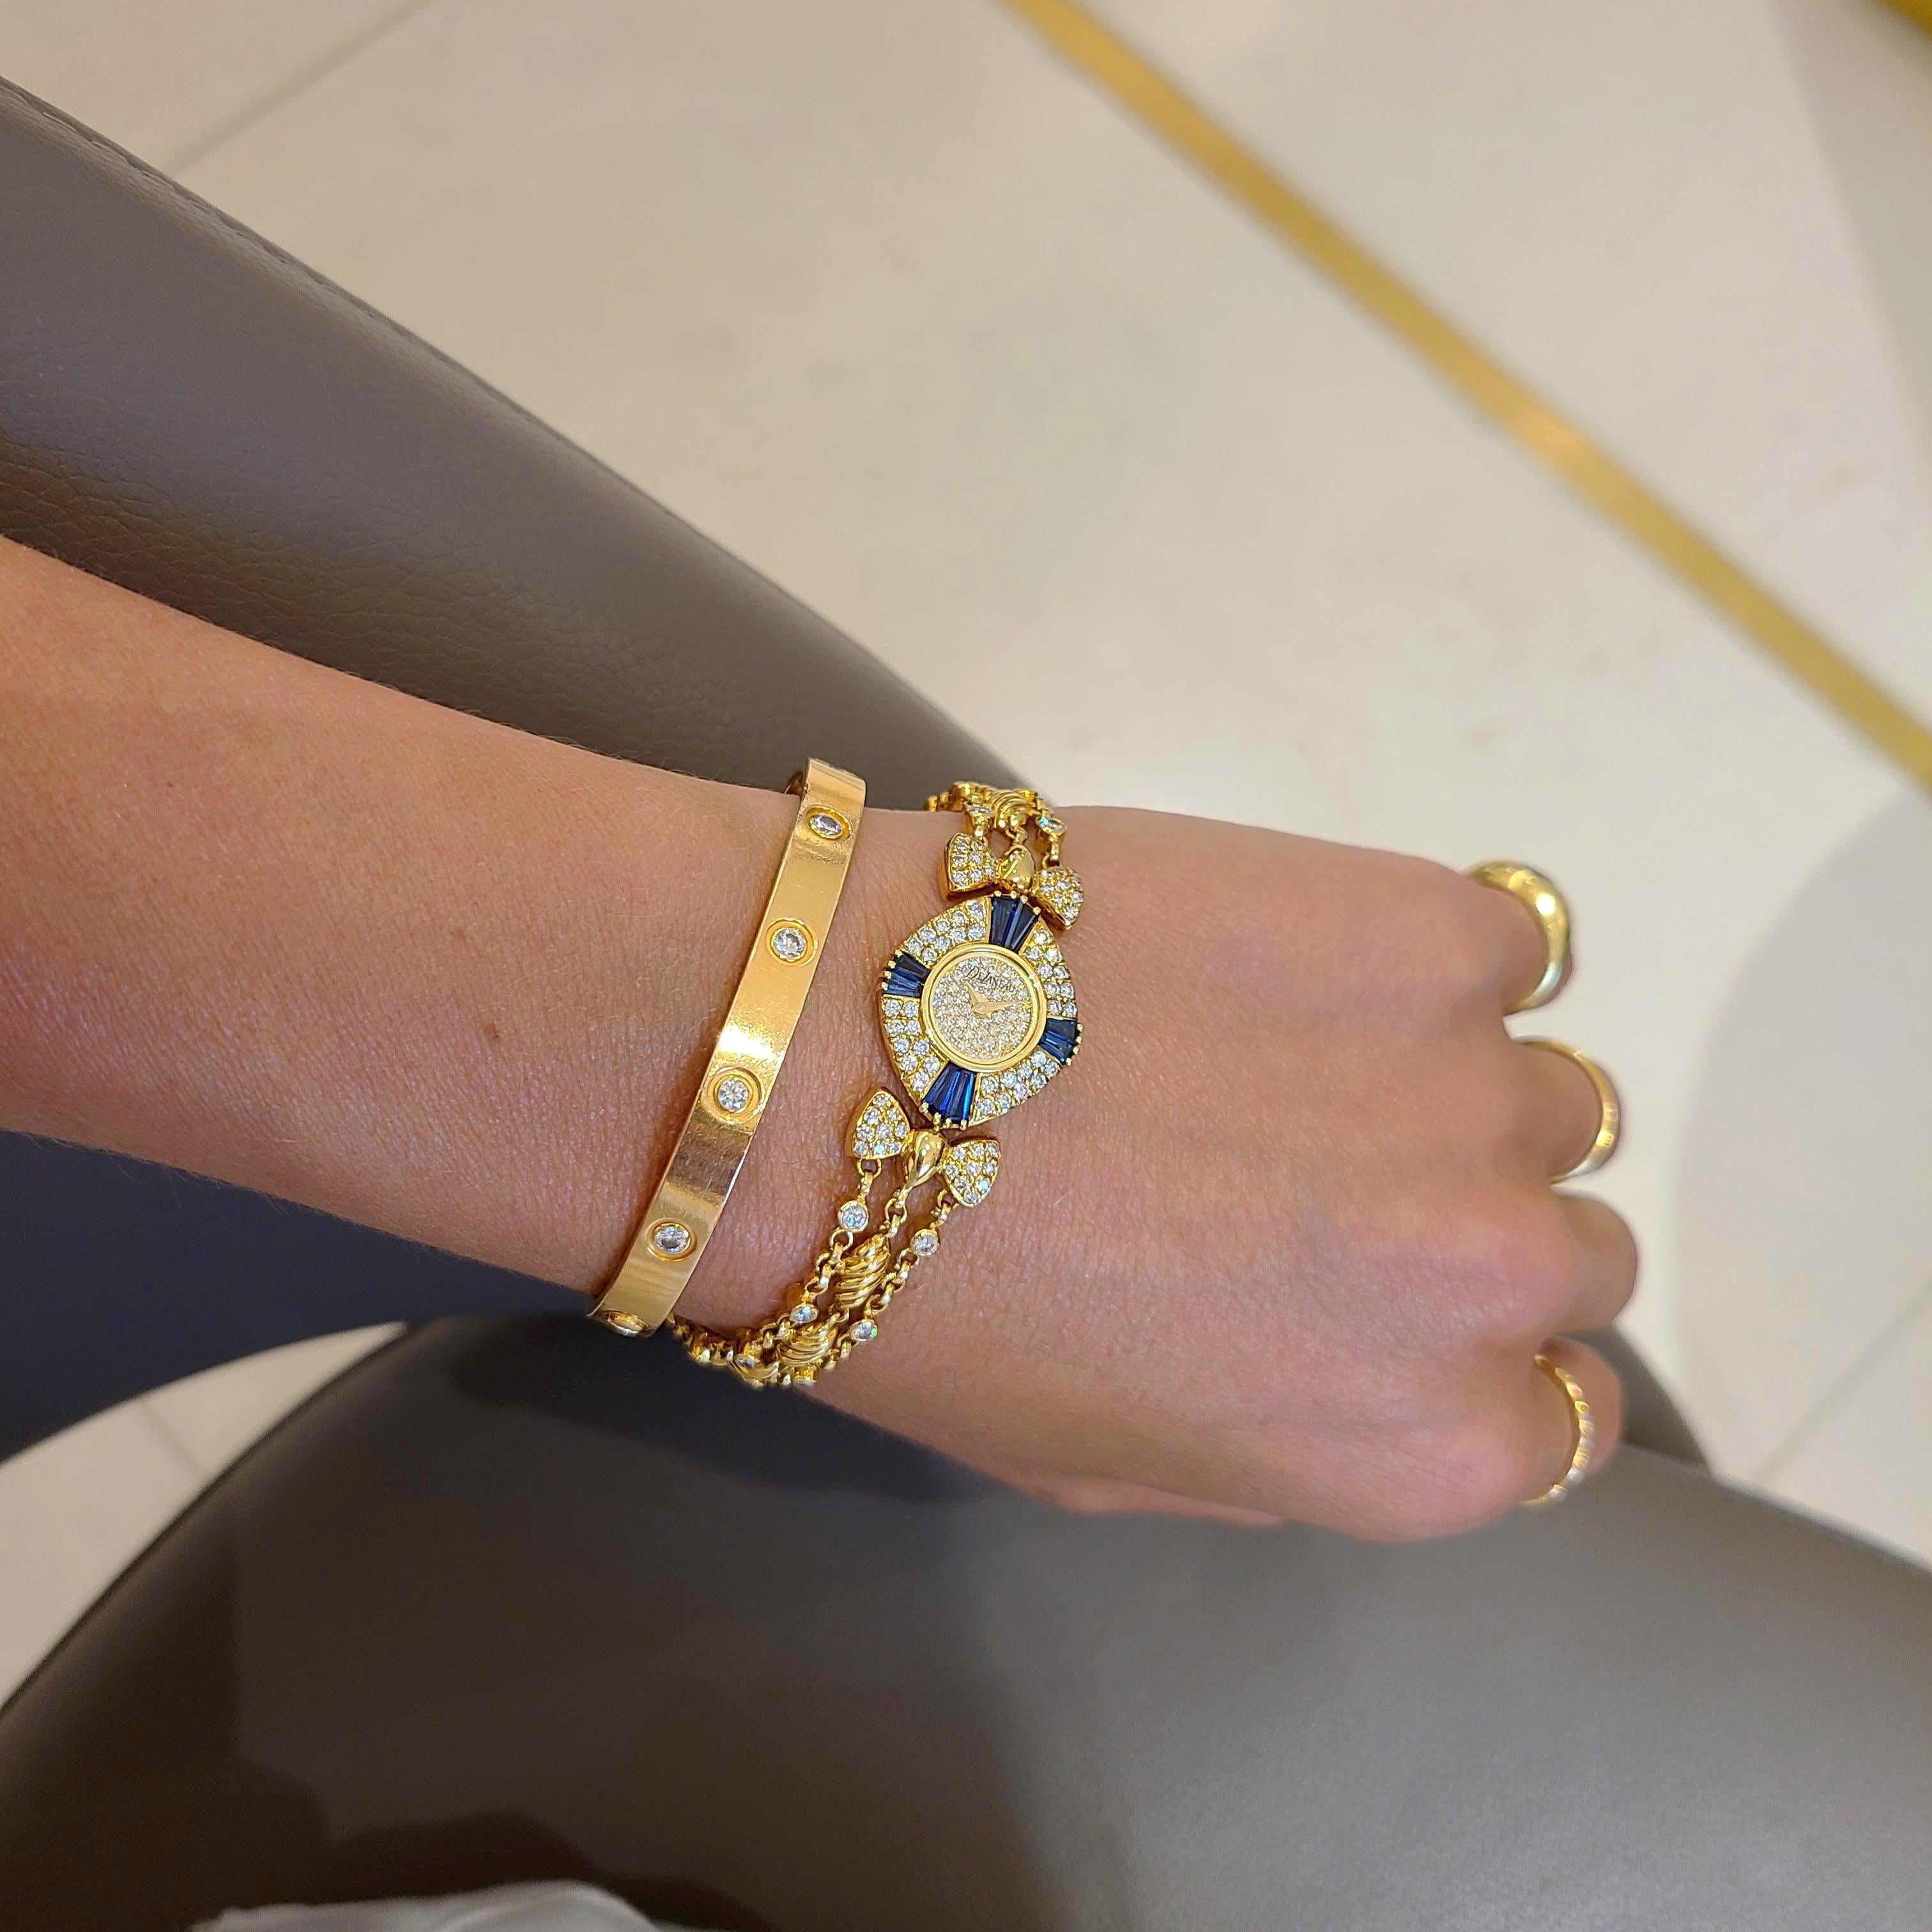 DeLaneau 18 Karat Yellow Gold Diamond and Blue Sapphire Bracelet Watch In New Condition For Sale In New York, NY